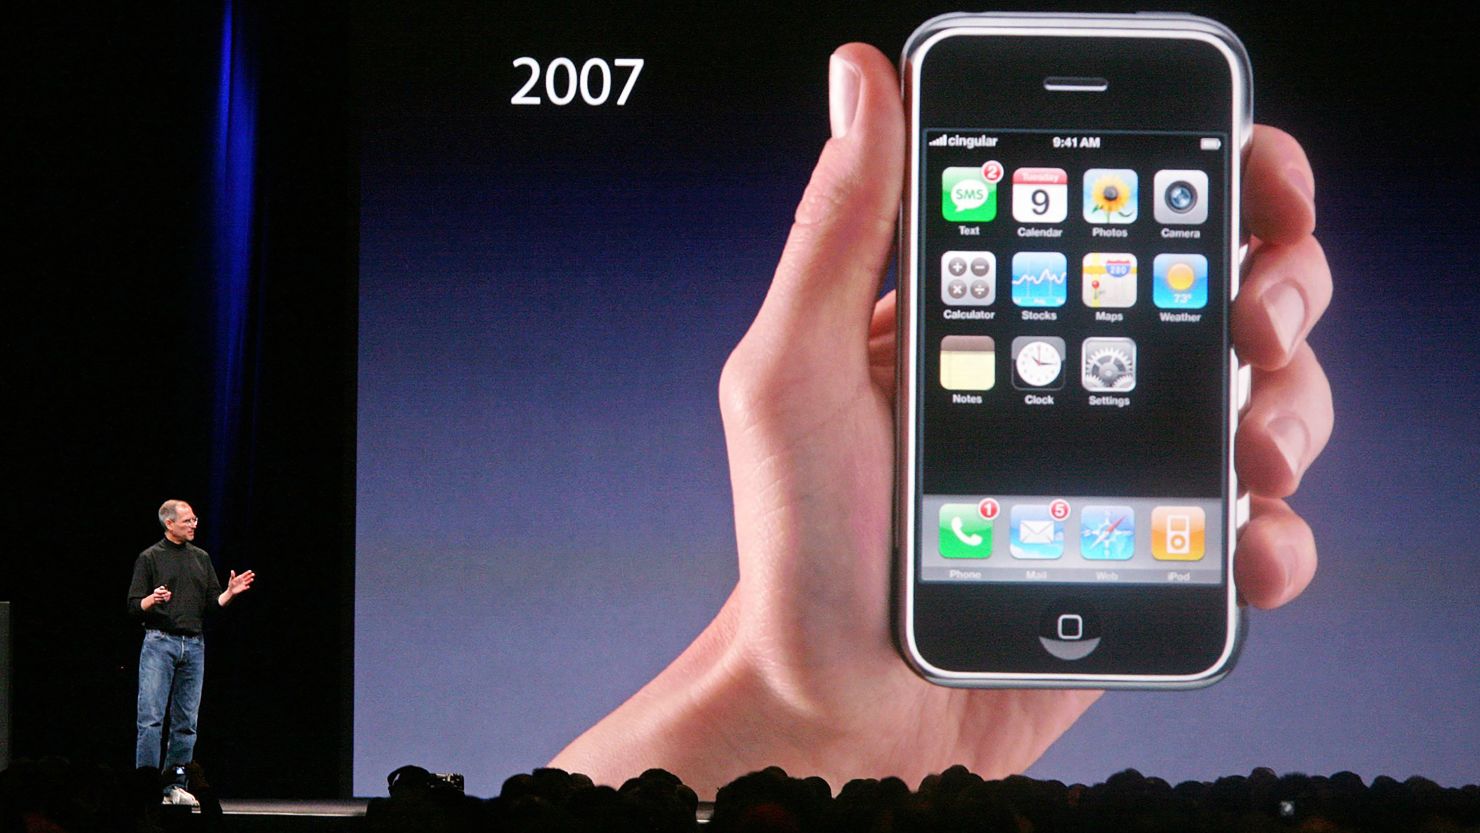 Apple CEO Steve Jobs introduces the new iPhone at Macworld in San Francisco on January 9, 2007.